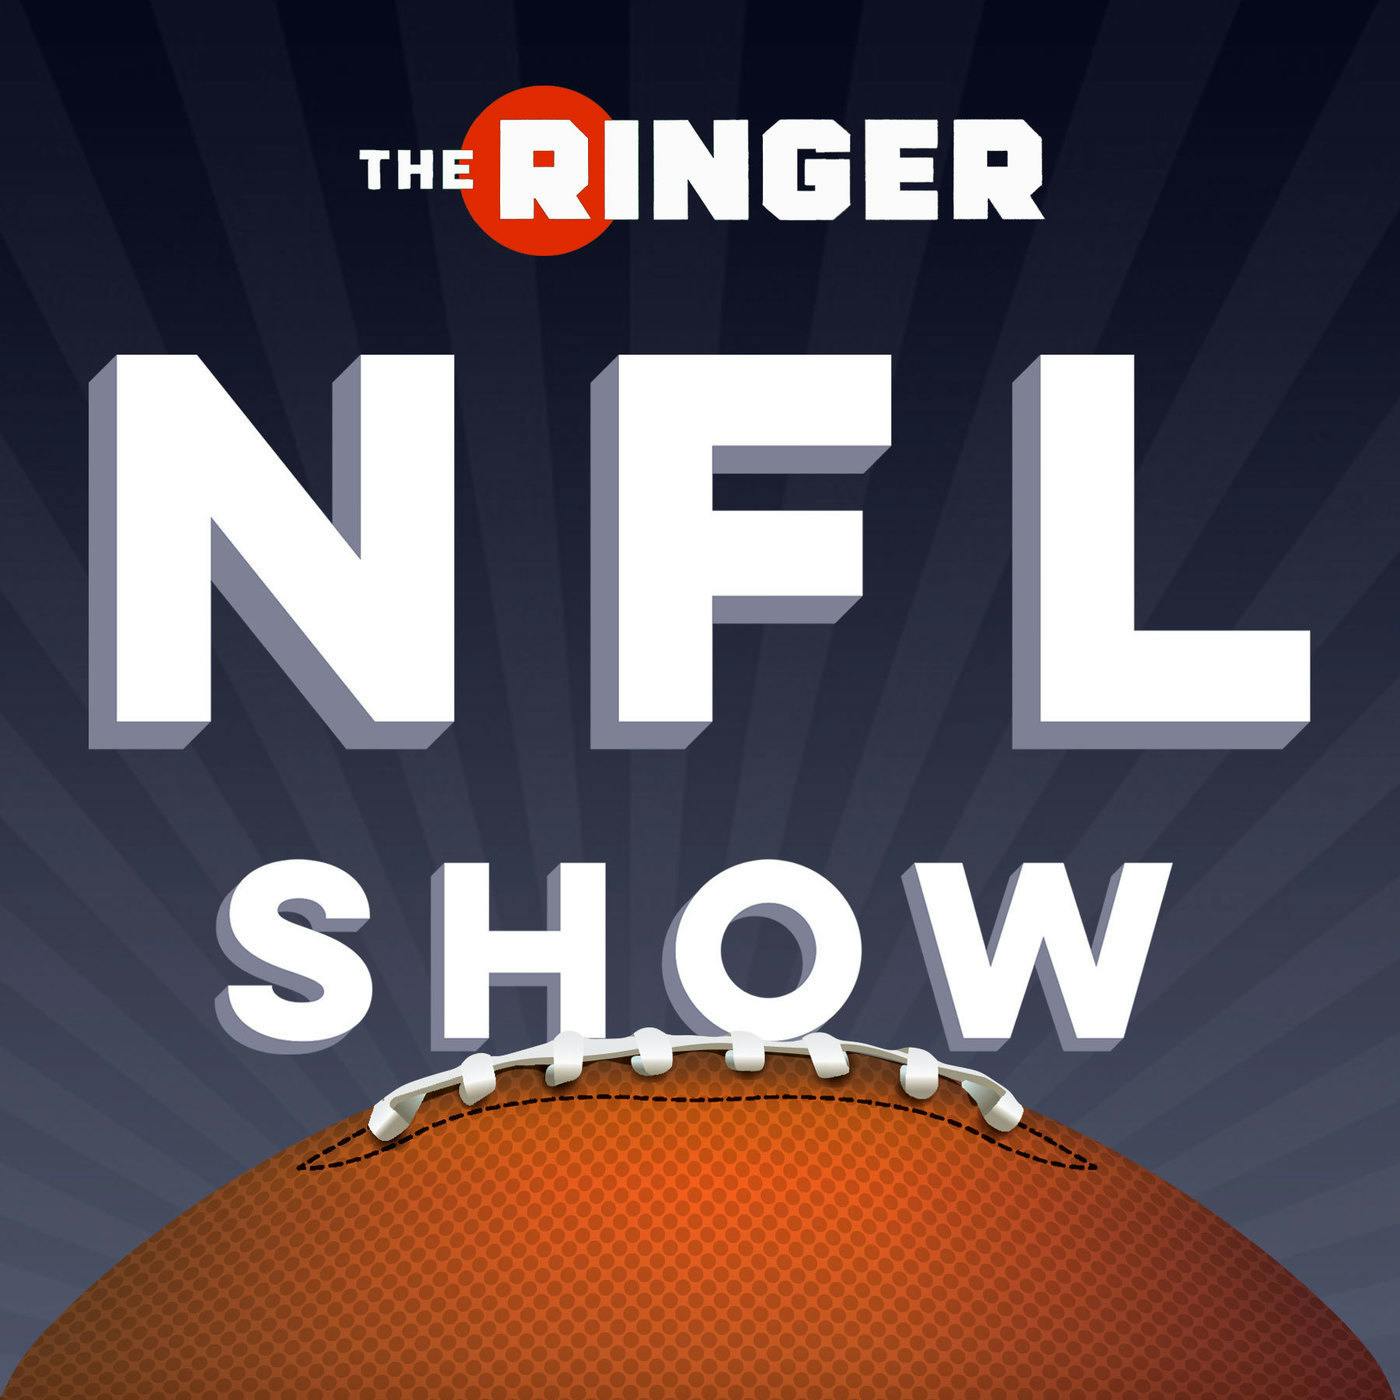 MVP Mahomes, Andy Reid’s Legacy, Garoppolo’s Future, and More From Super Bowl LIV  | The Ringer NFL Show